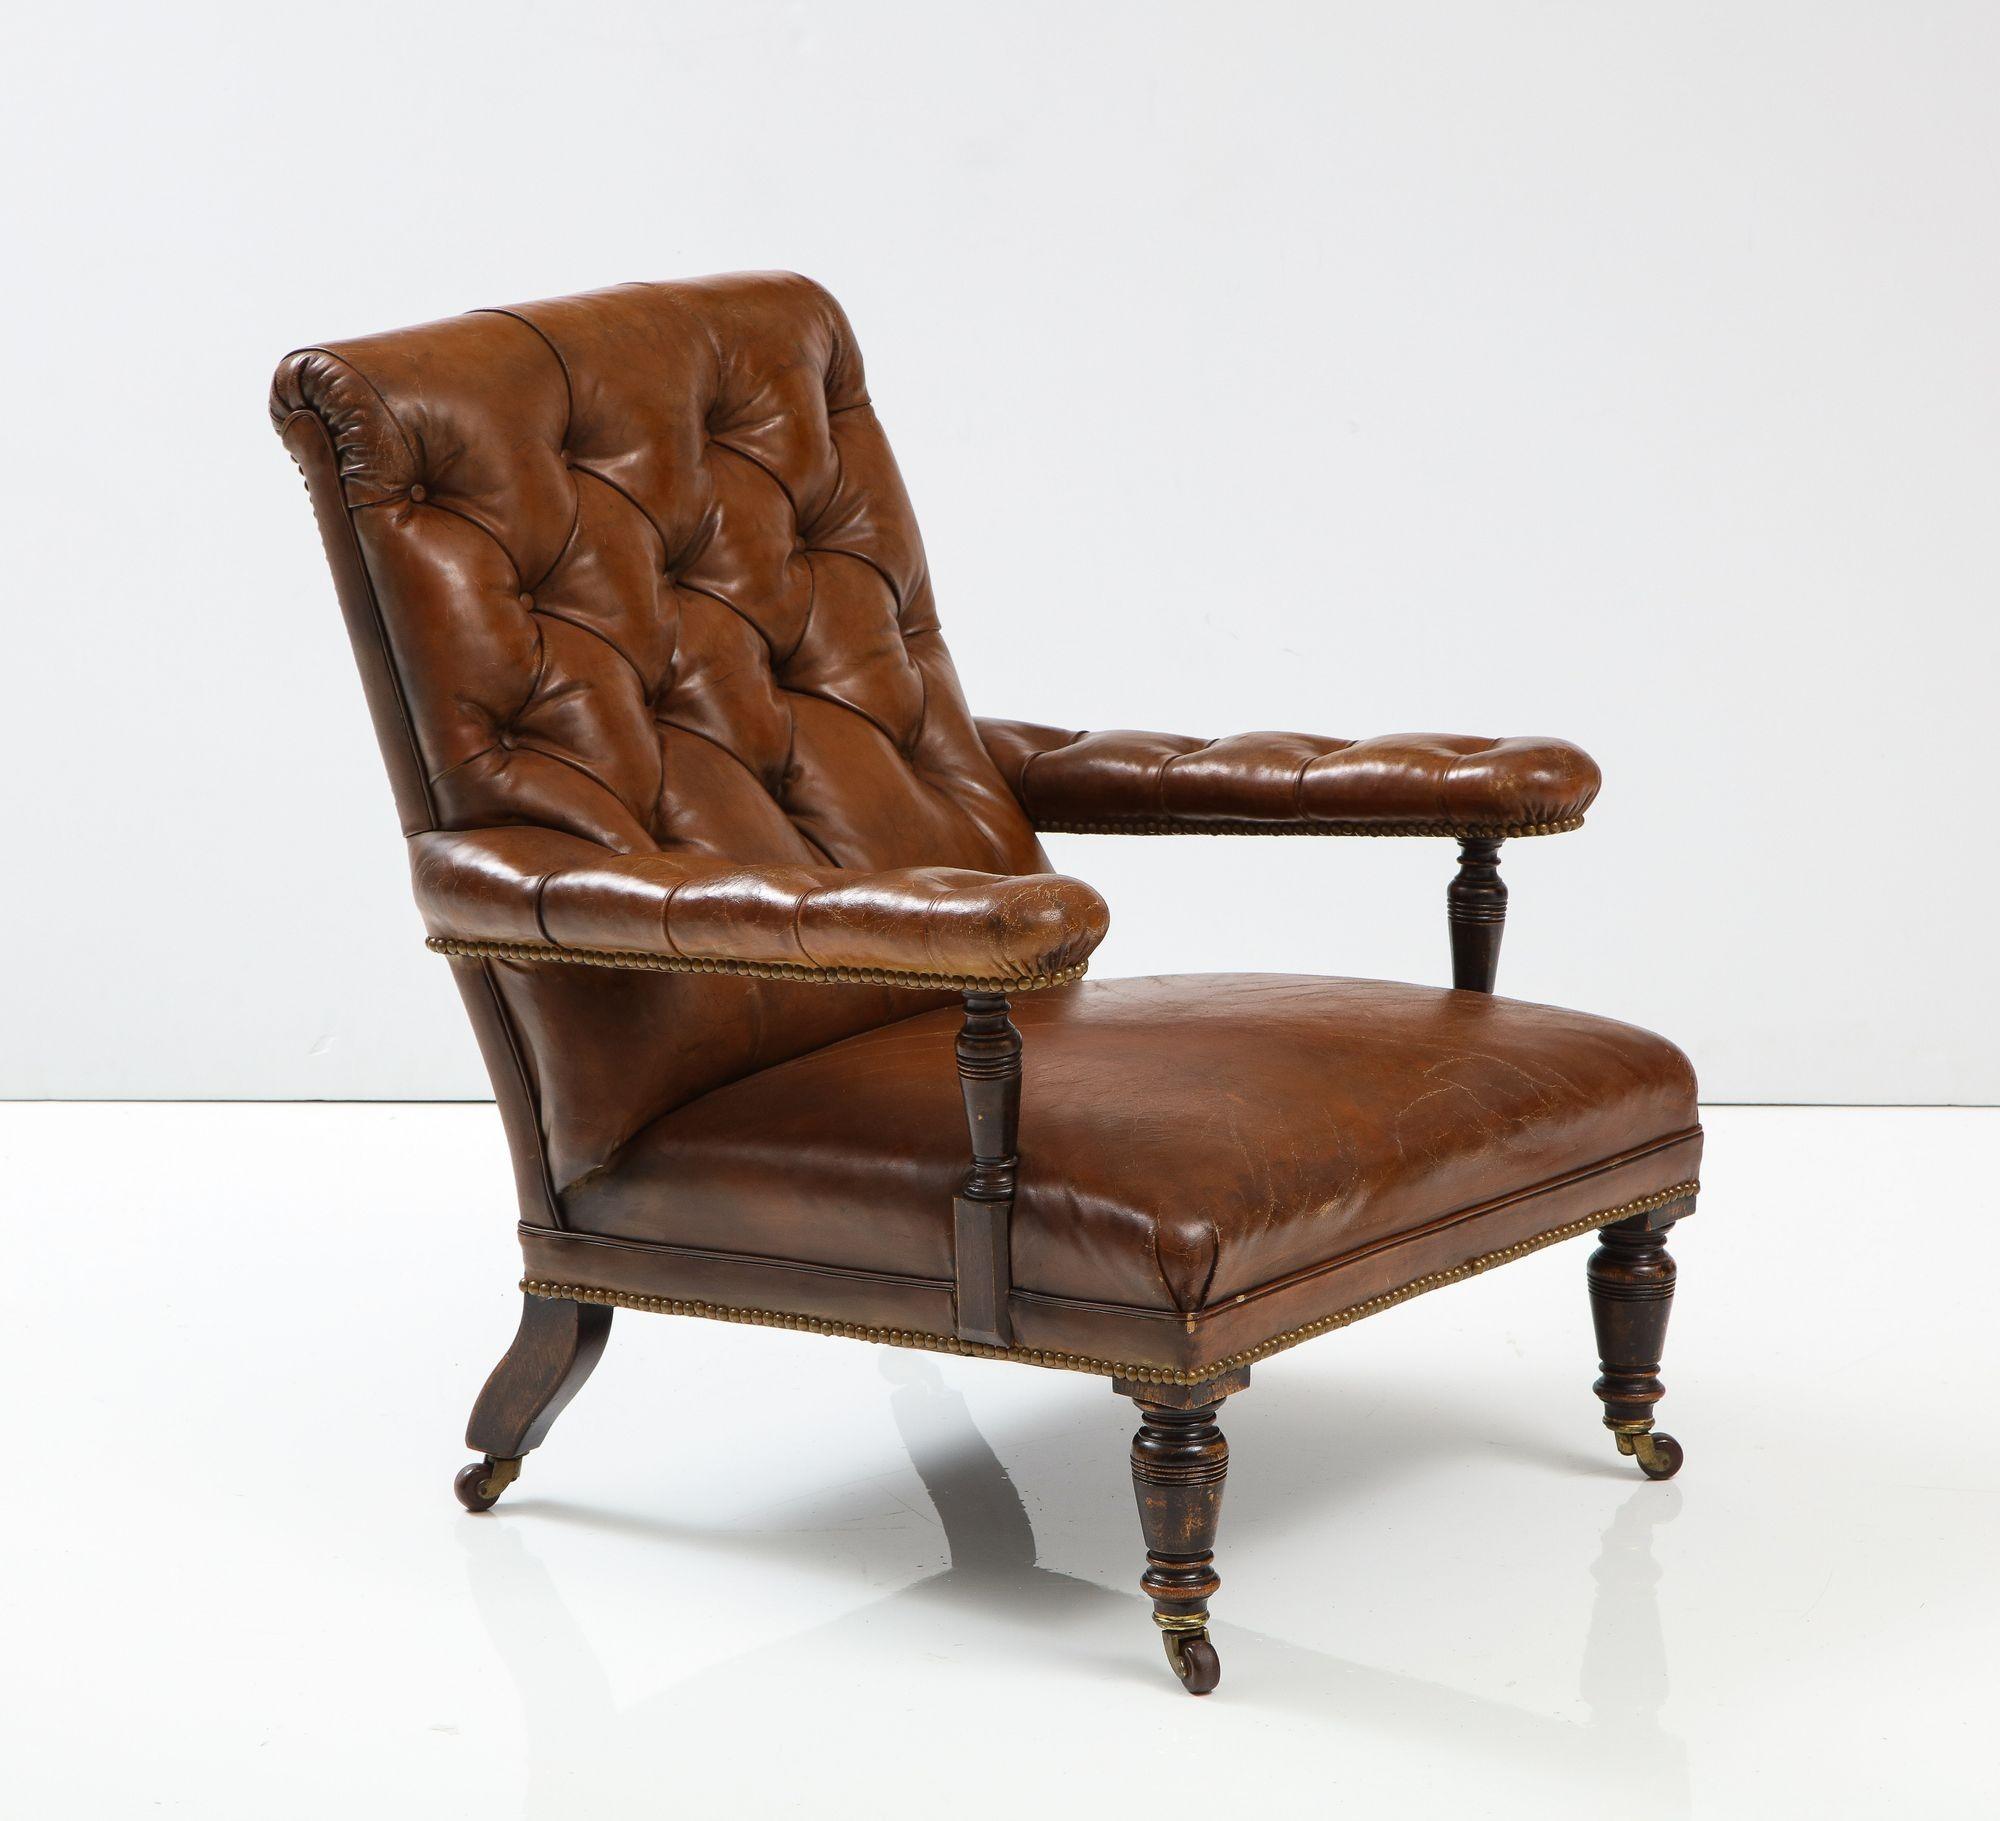 19th Century 19th C. English Tufted Leather Library Chair